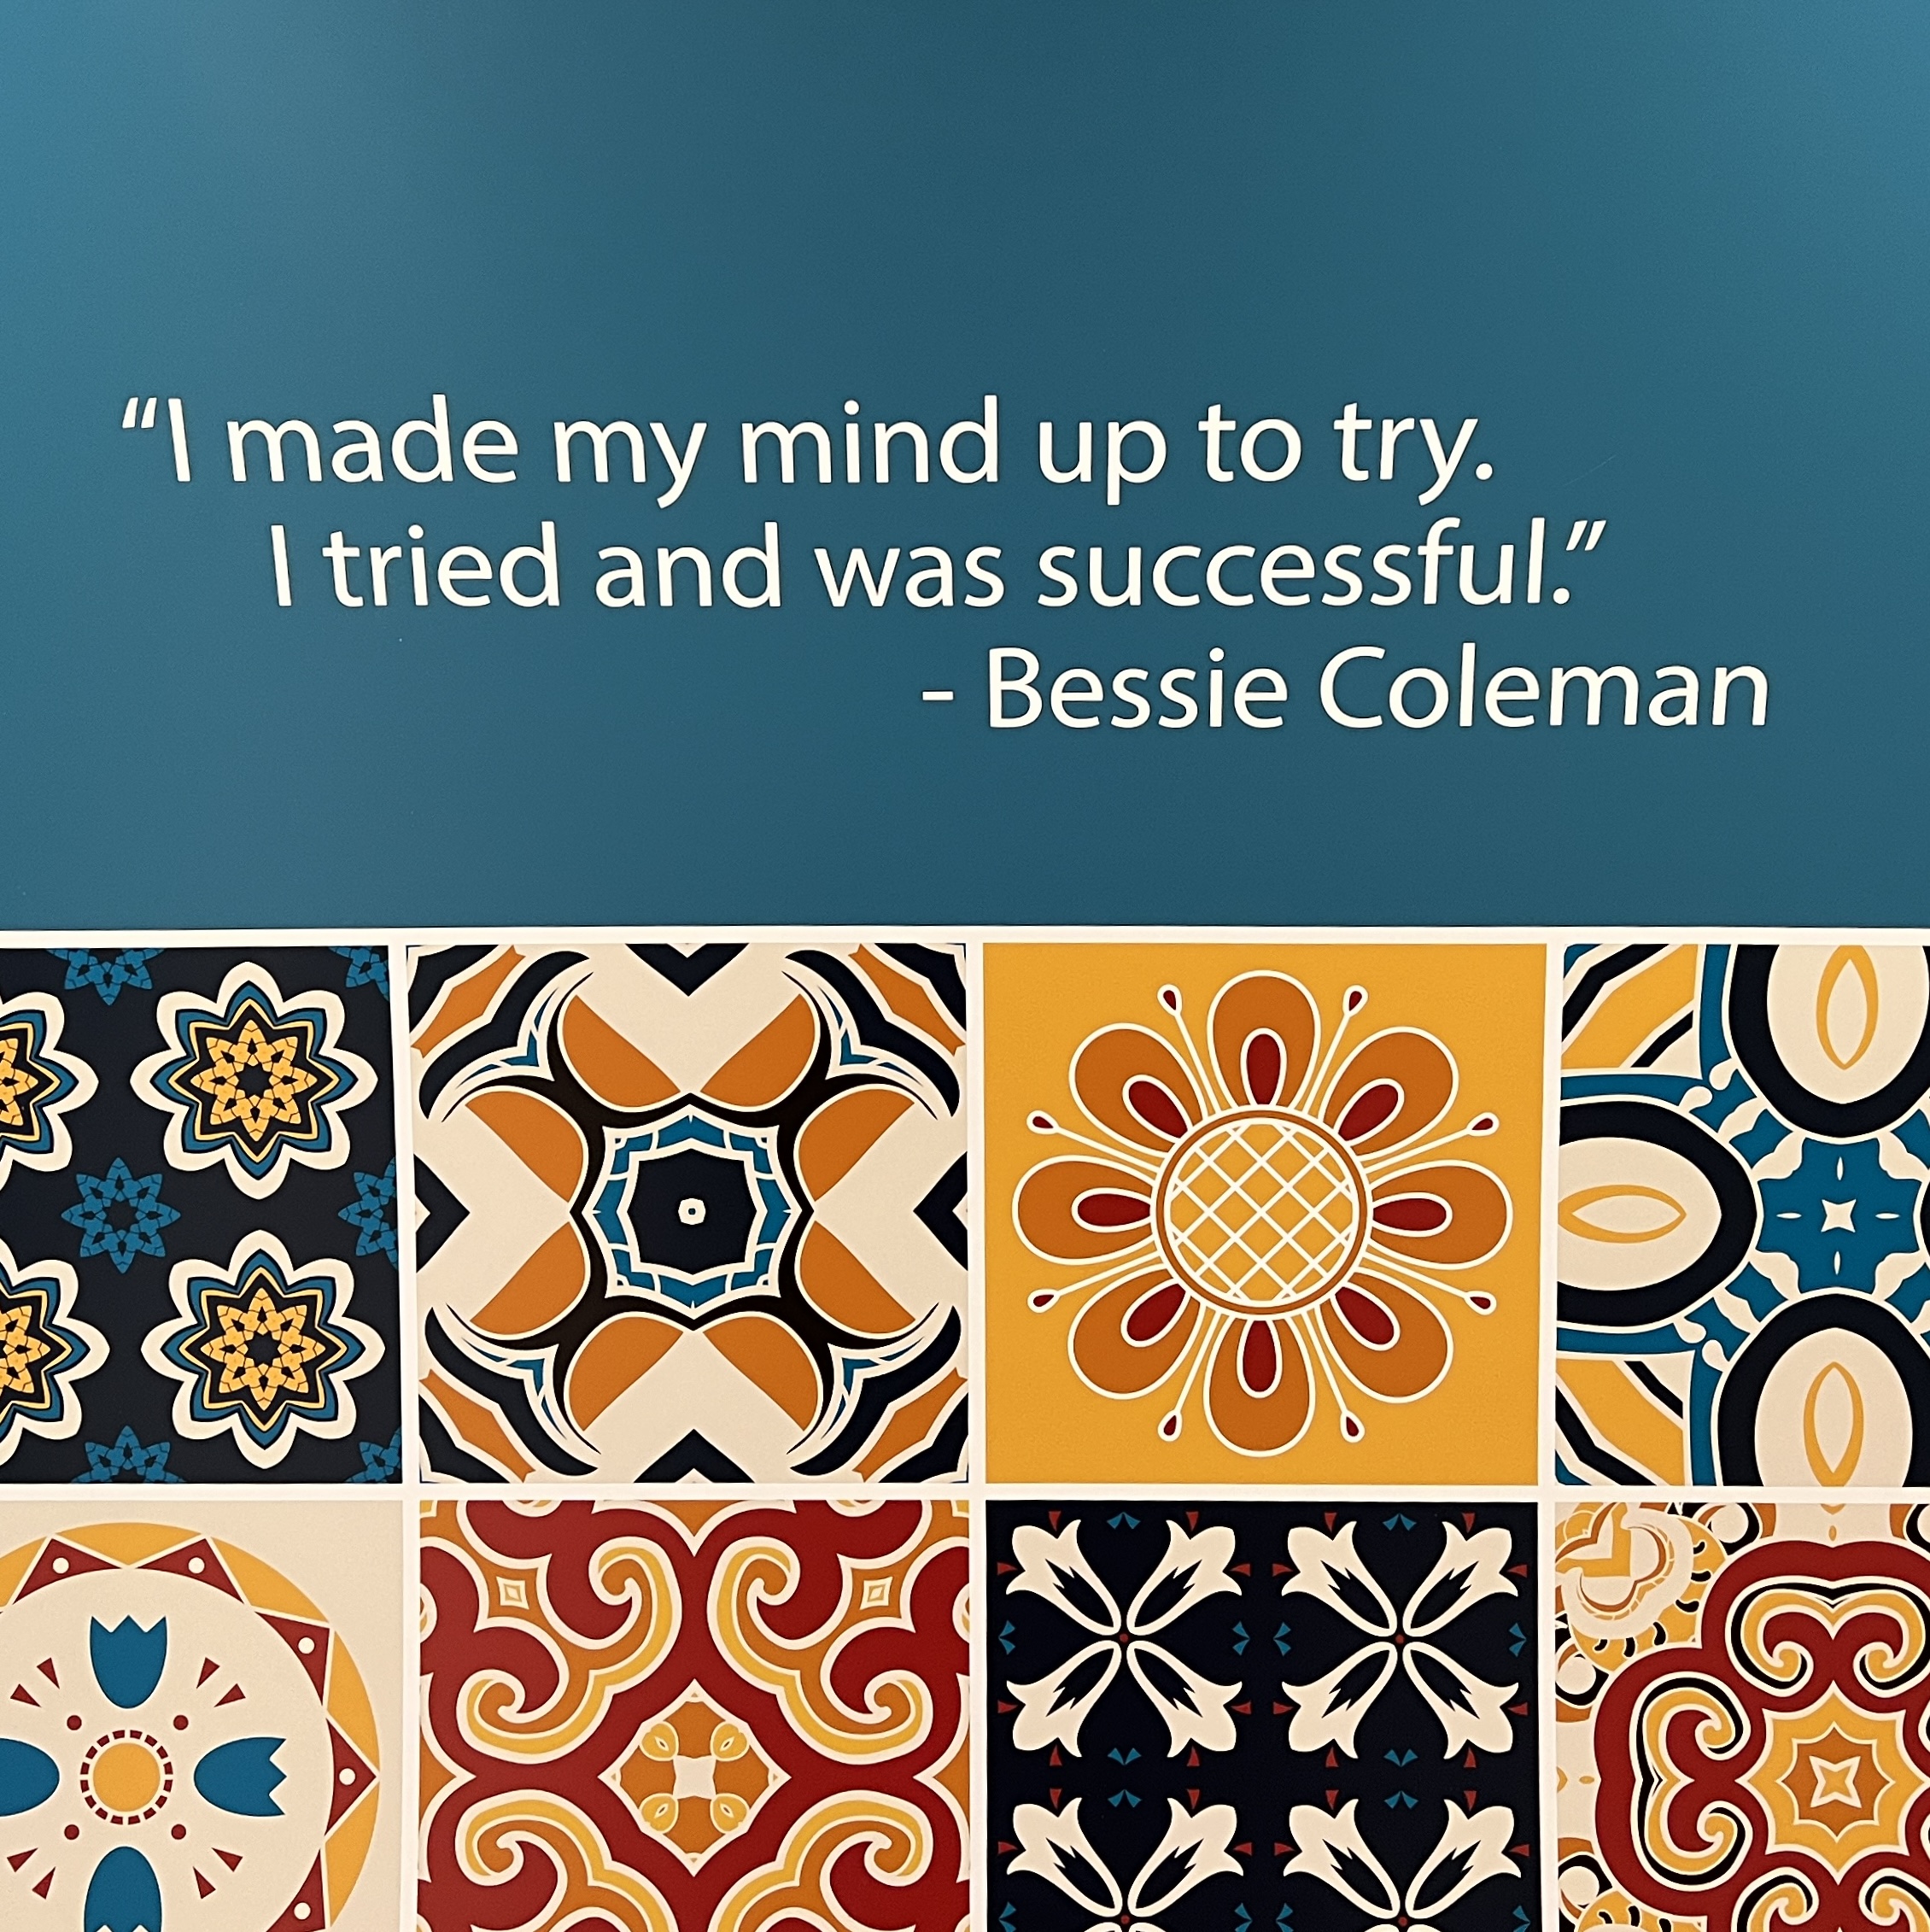 Text reading "I made my mind up to try. I tried and was successful." -Bessie Coleman